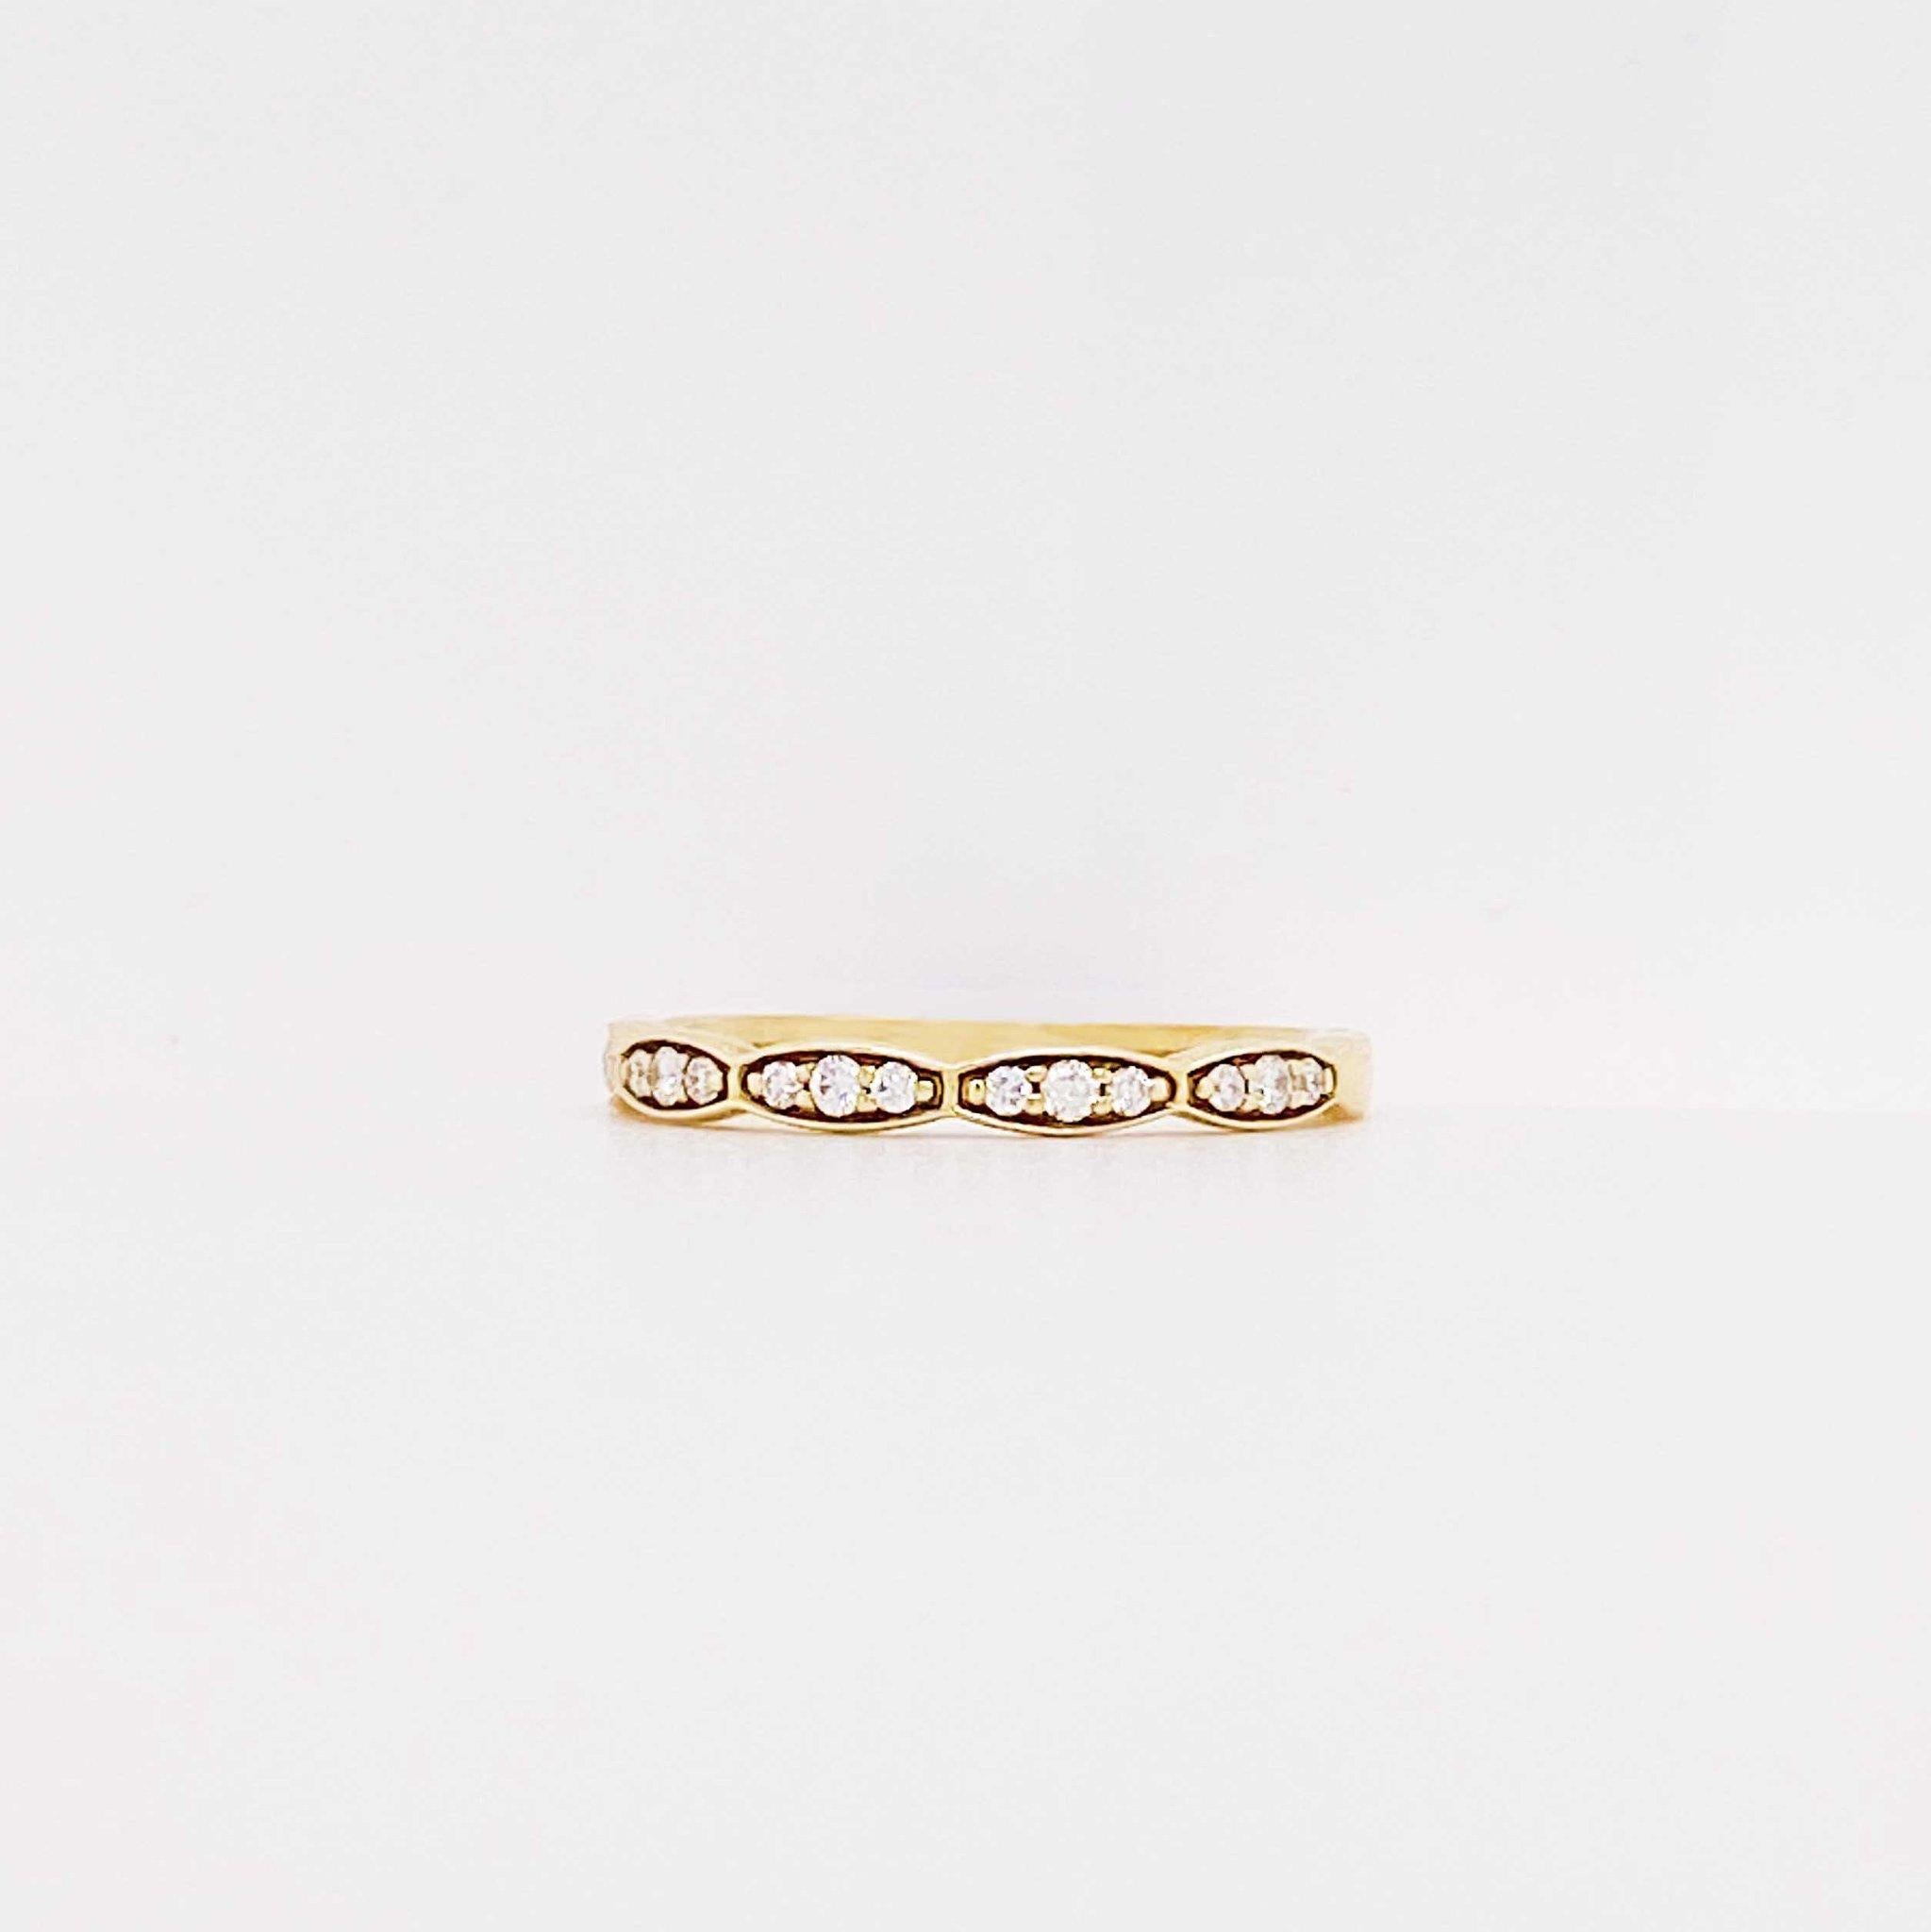 The diamond scallop band is a modern design with genuine round brilliant diamonds set in 14k yellow gold. This diamond band has a scalloped profile design that resembles Tacori. The diamond ring is versatile and can be paired with almost any ring.